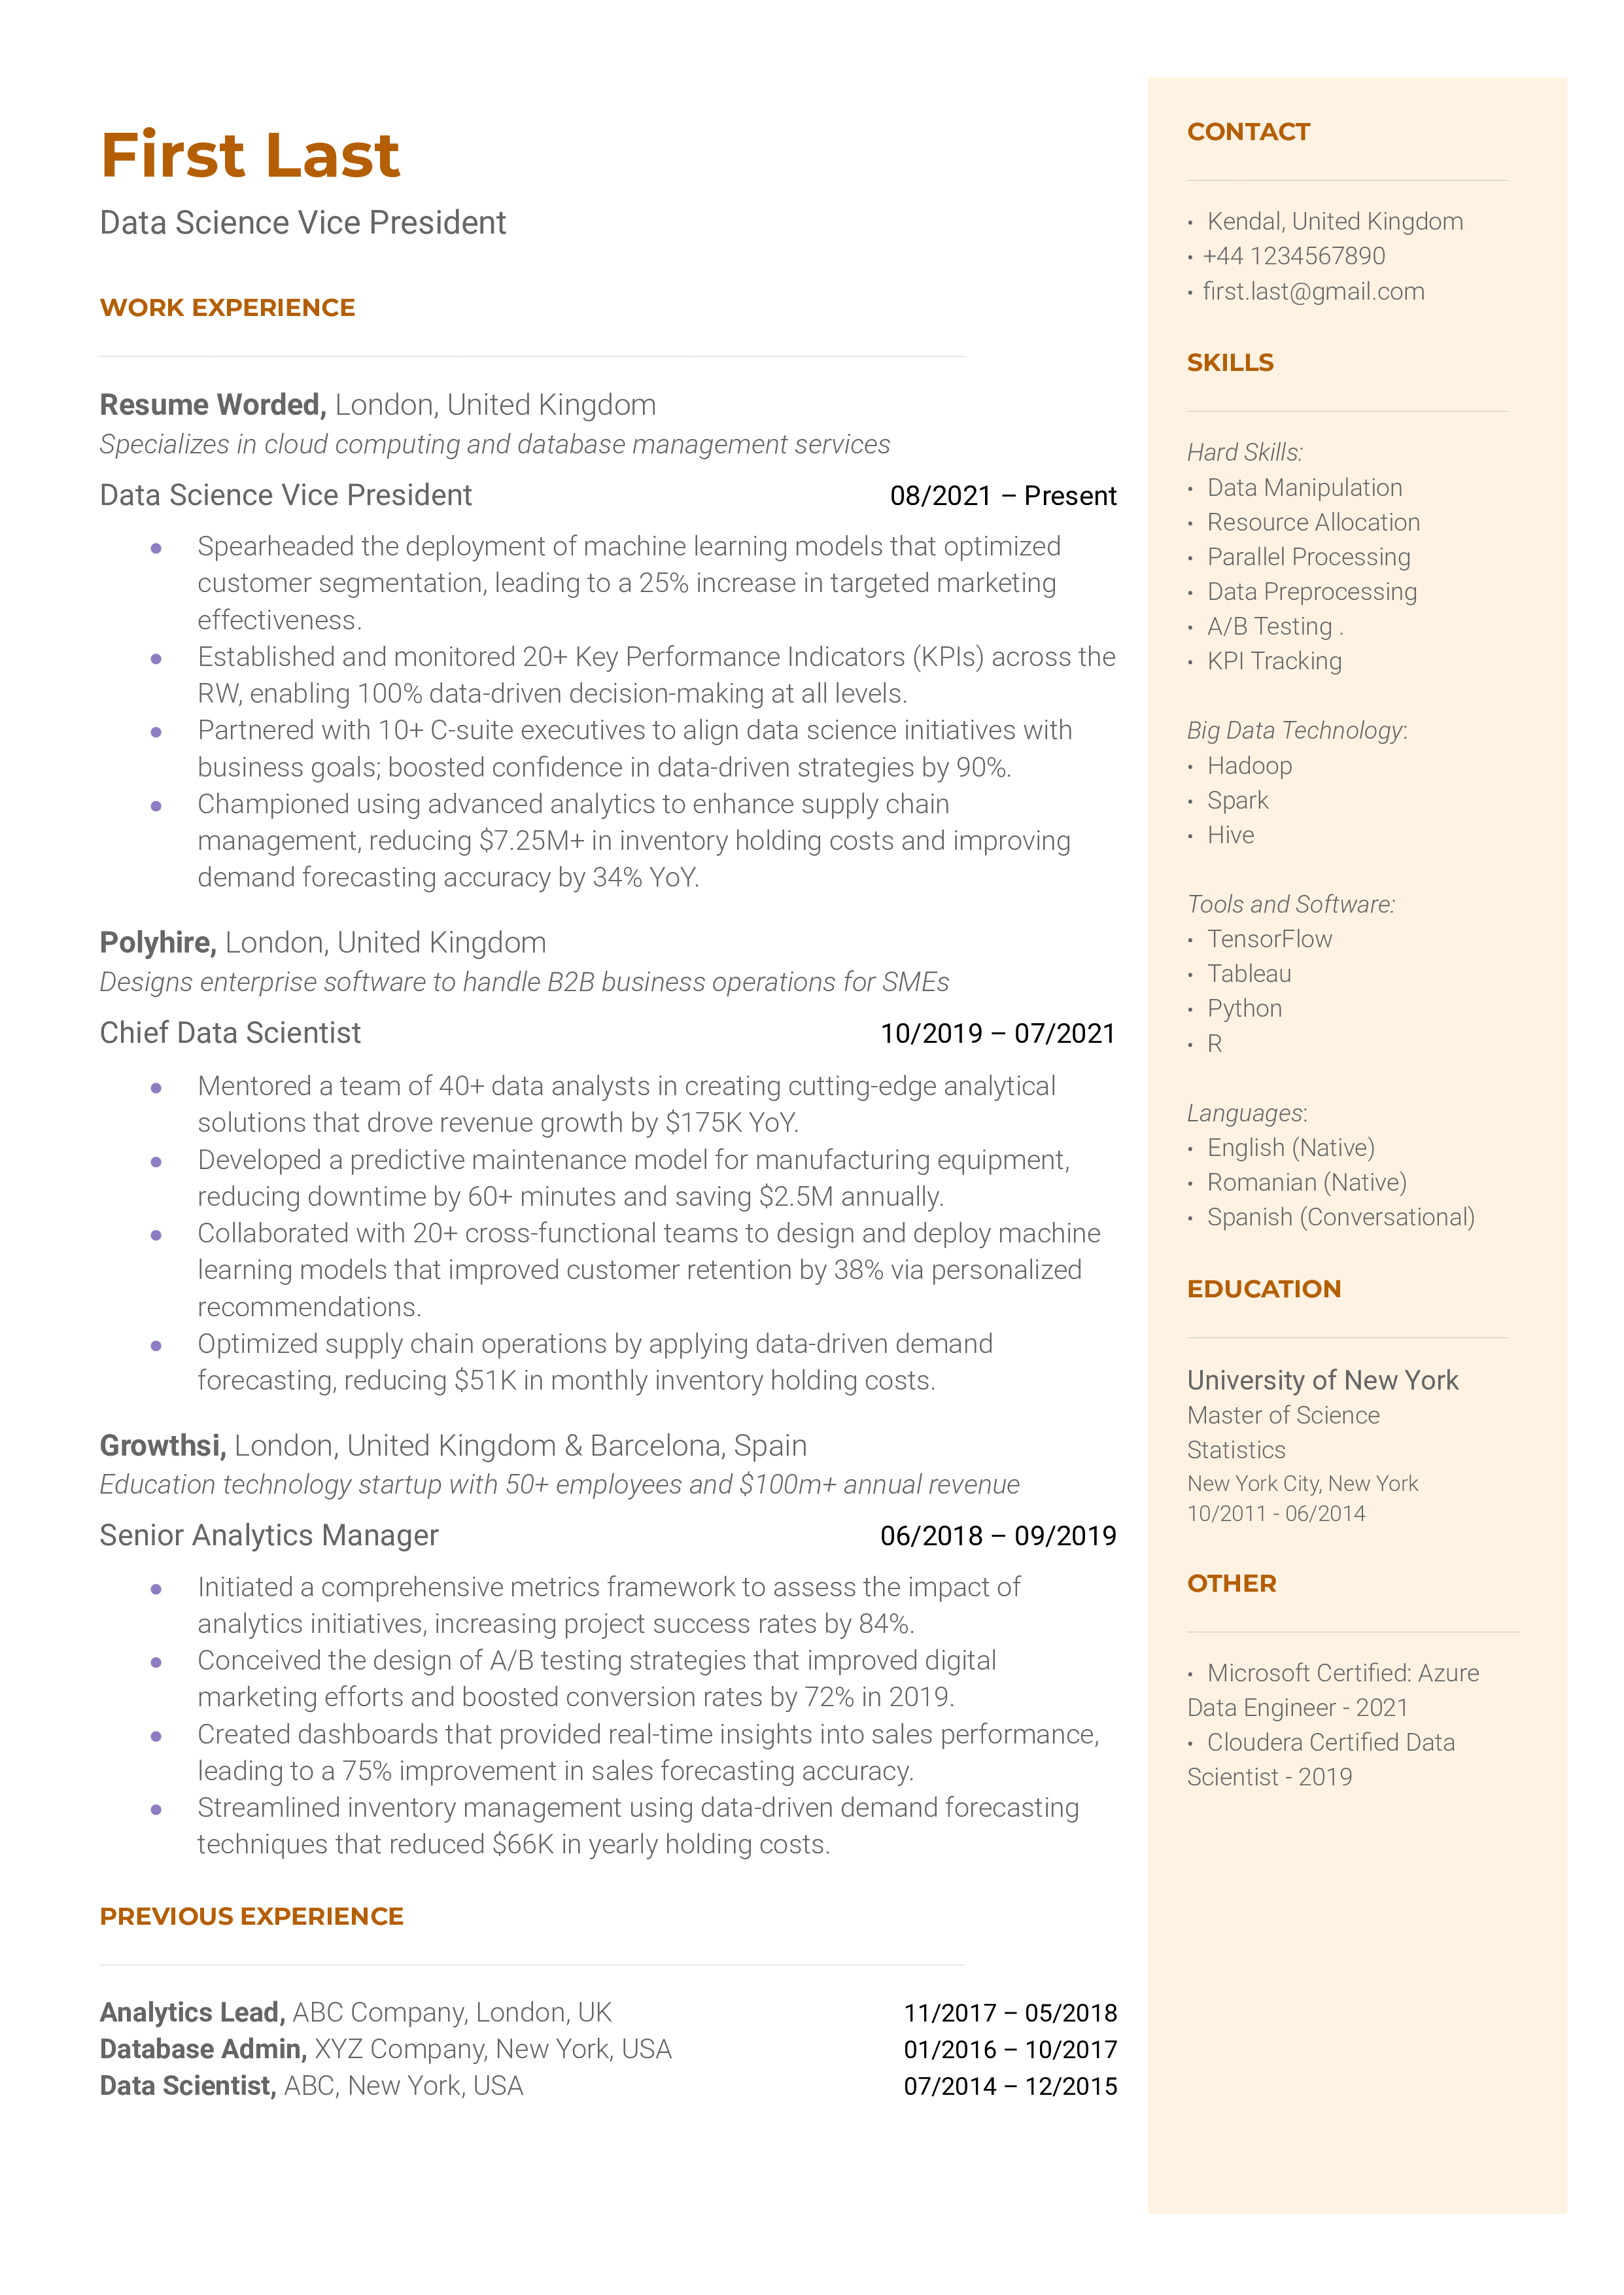 A professional resume of a candidate applying for a Data Science Vice President role.